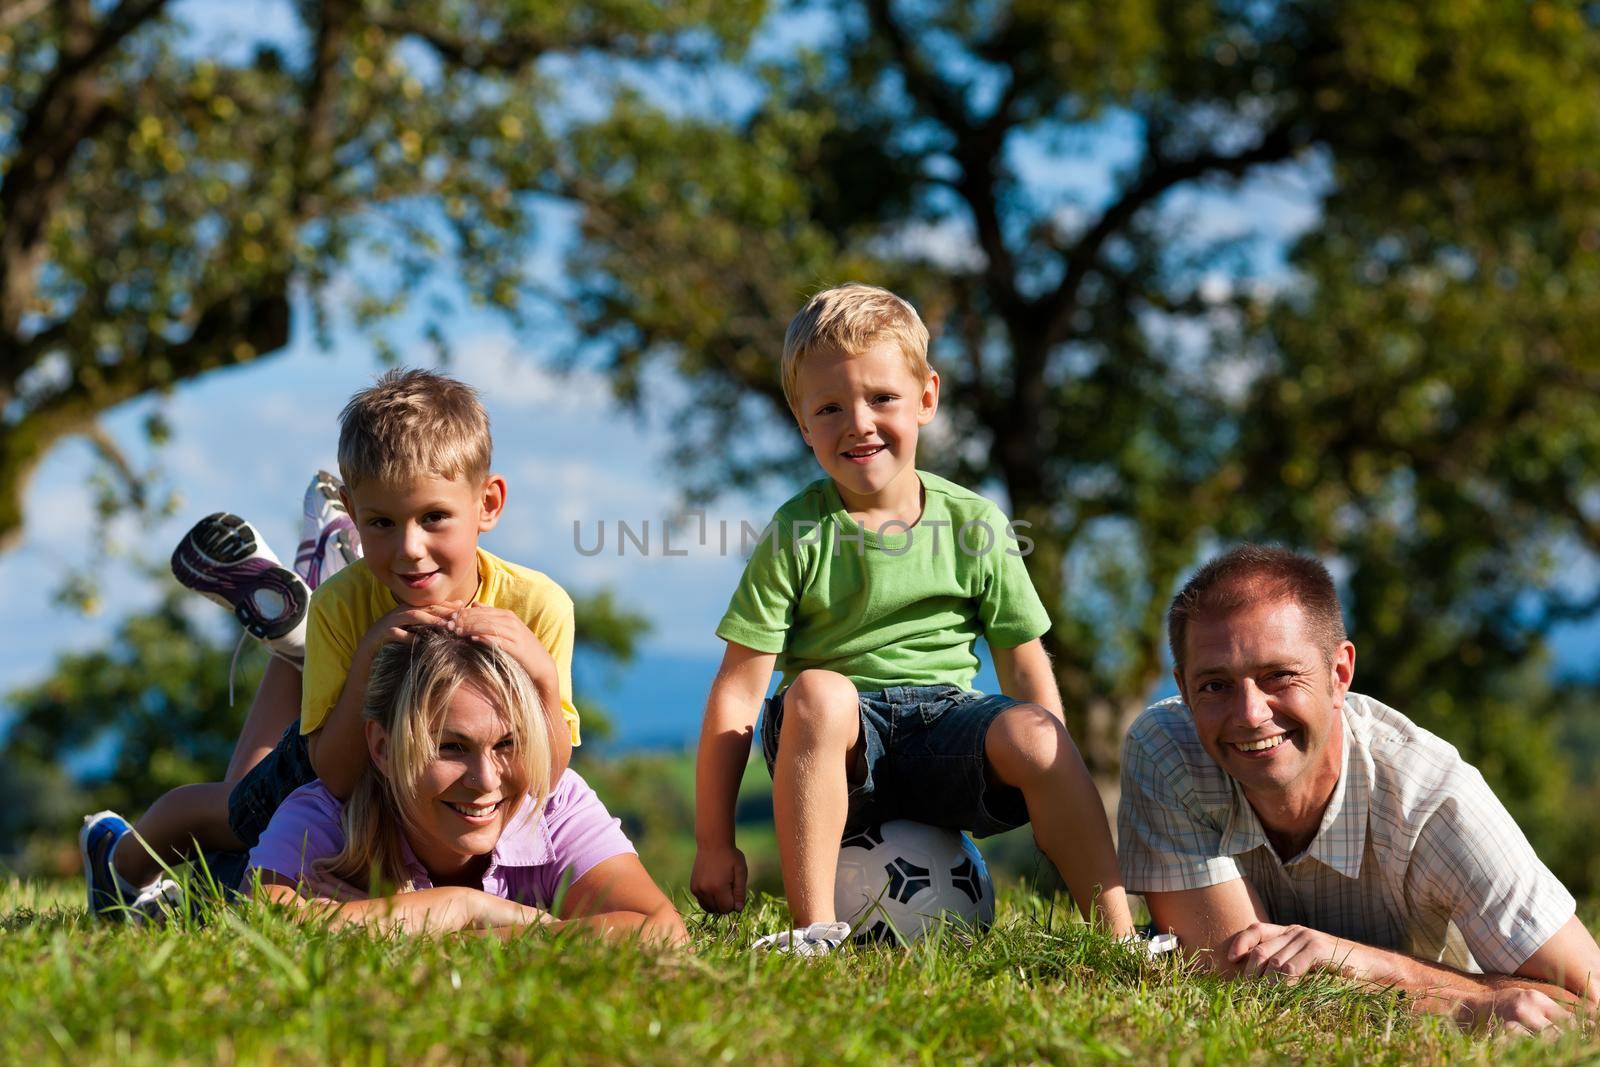 Family with children and football on a meadow by Kzenon